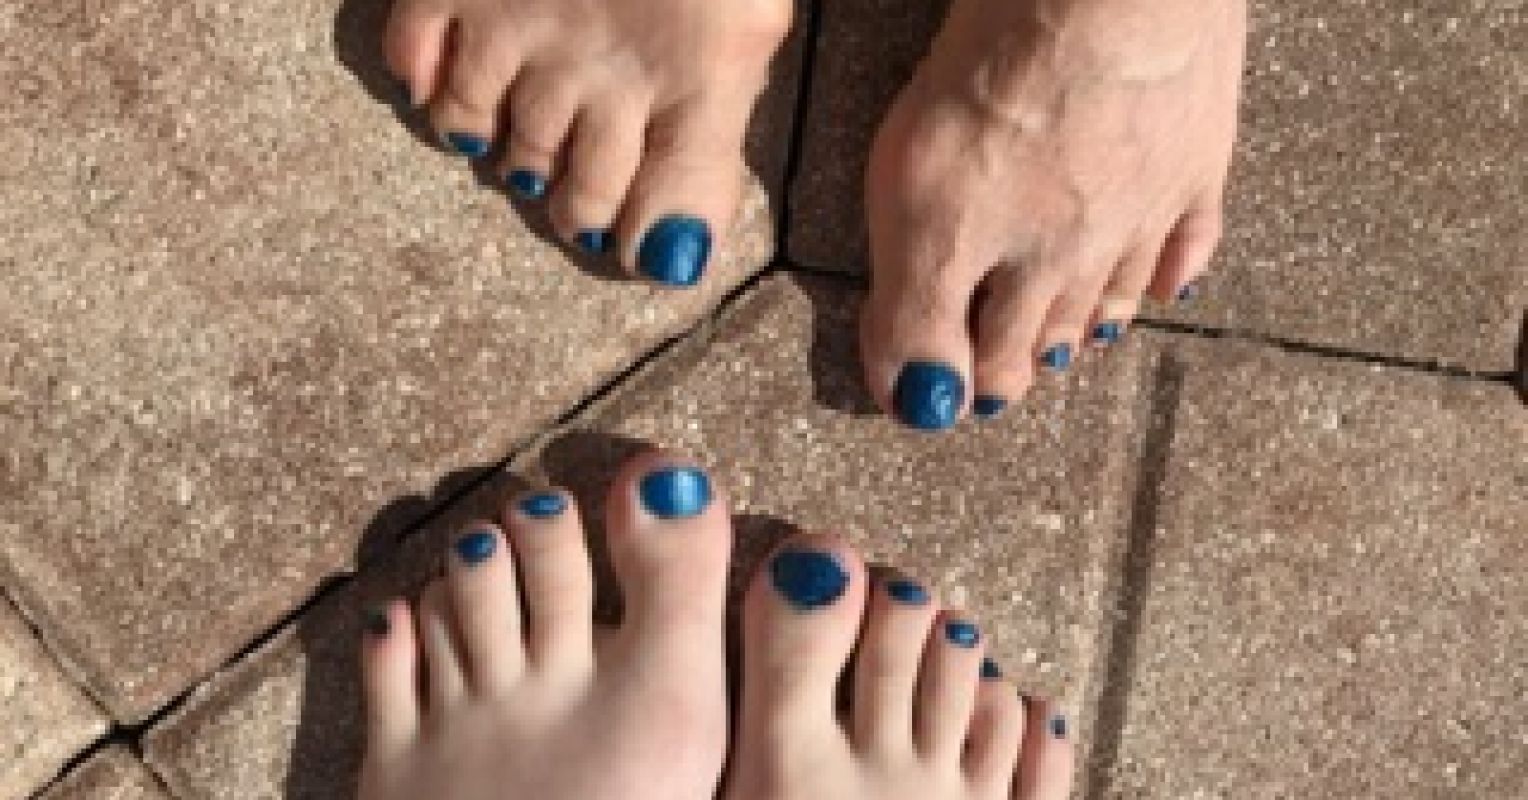 3. "Light Blue Nail Polish for Toes" - wide 8